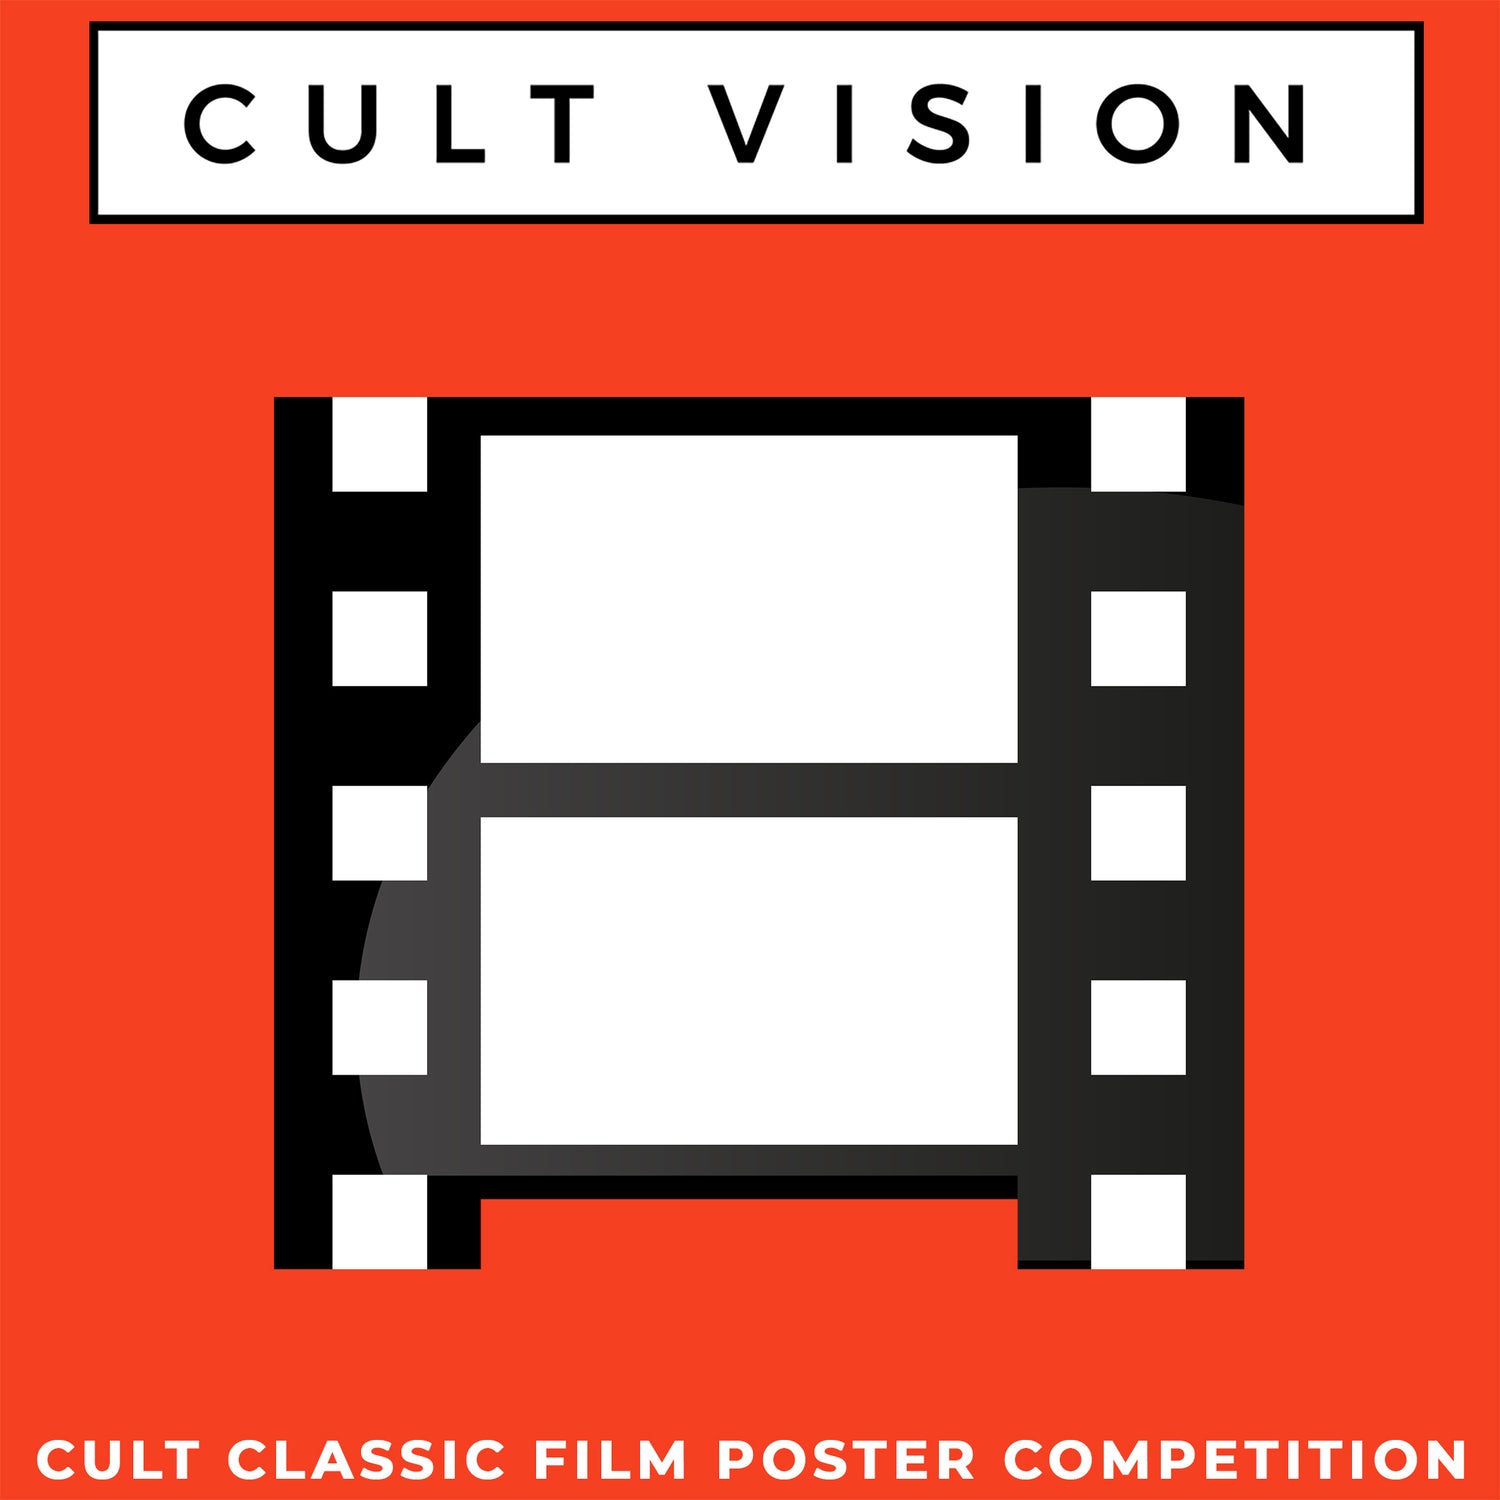 CULT CLASSIC FILM POSTER COMPETITION